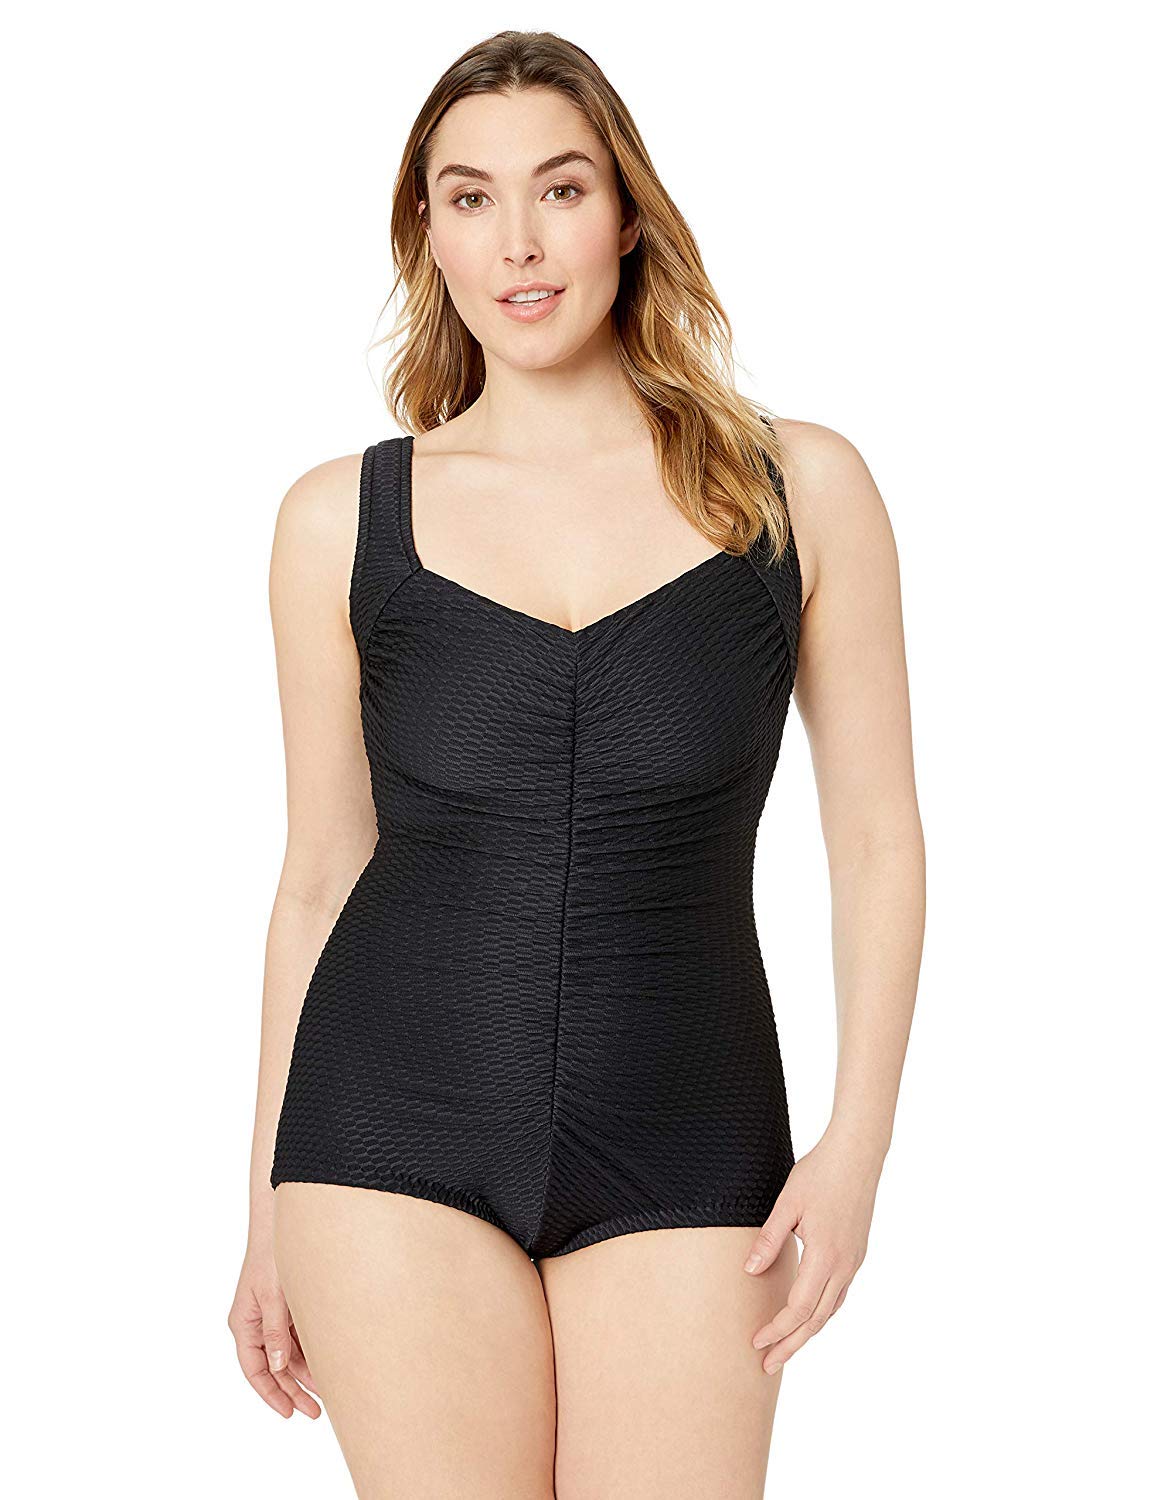 Maxine Of Hollywood Women's Plus-Size Shirred Front Girl Leg One Piece Swimsuit